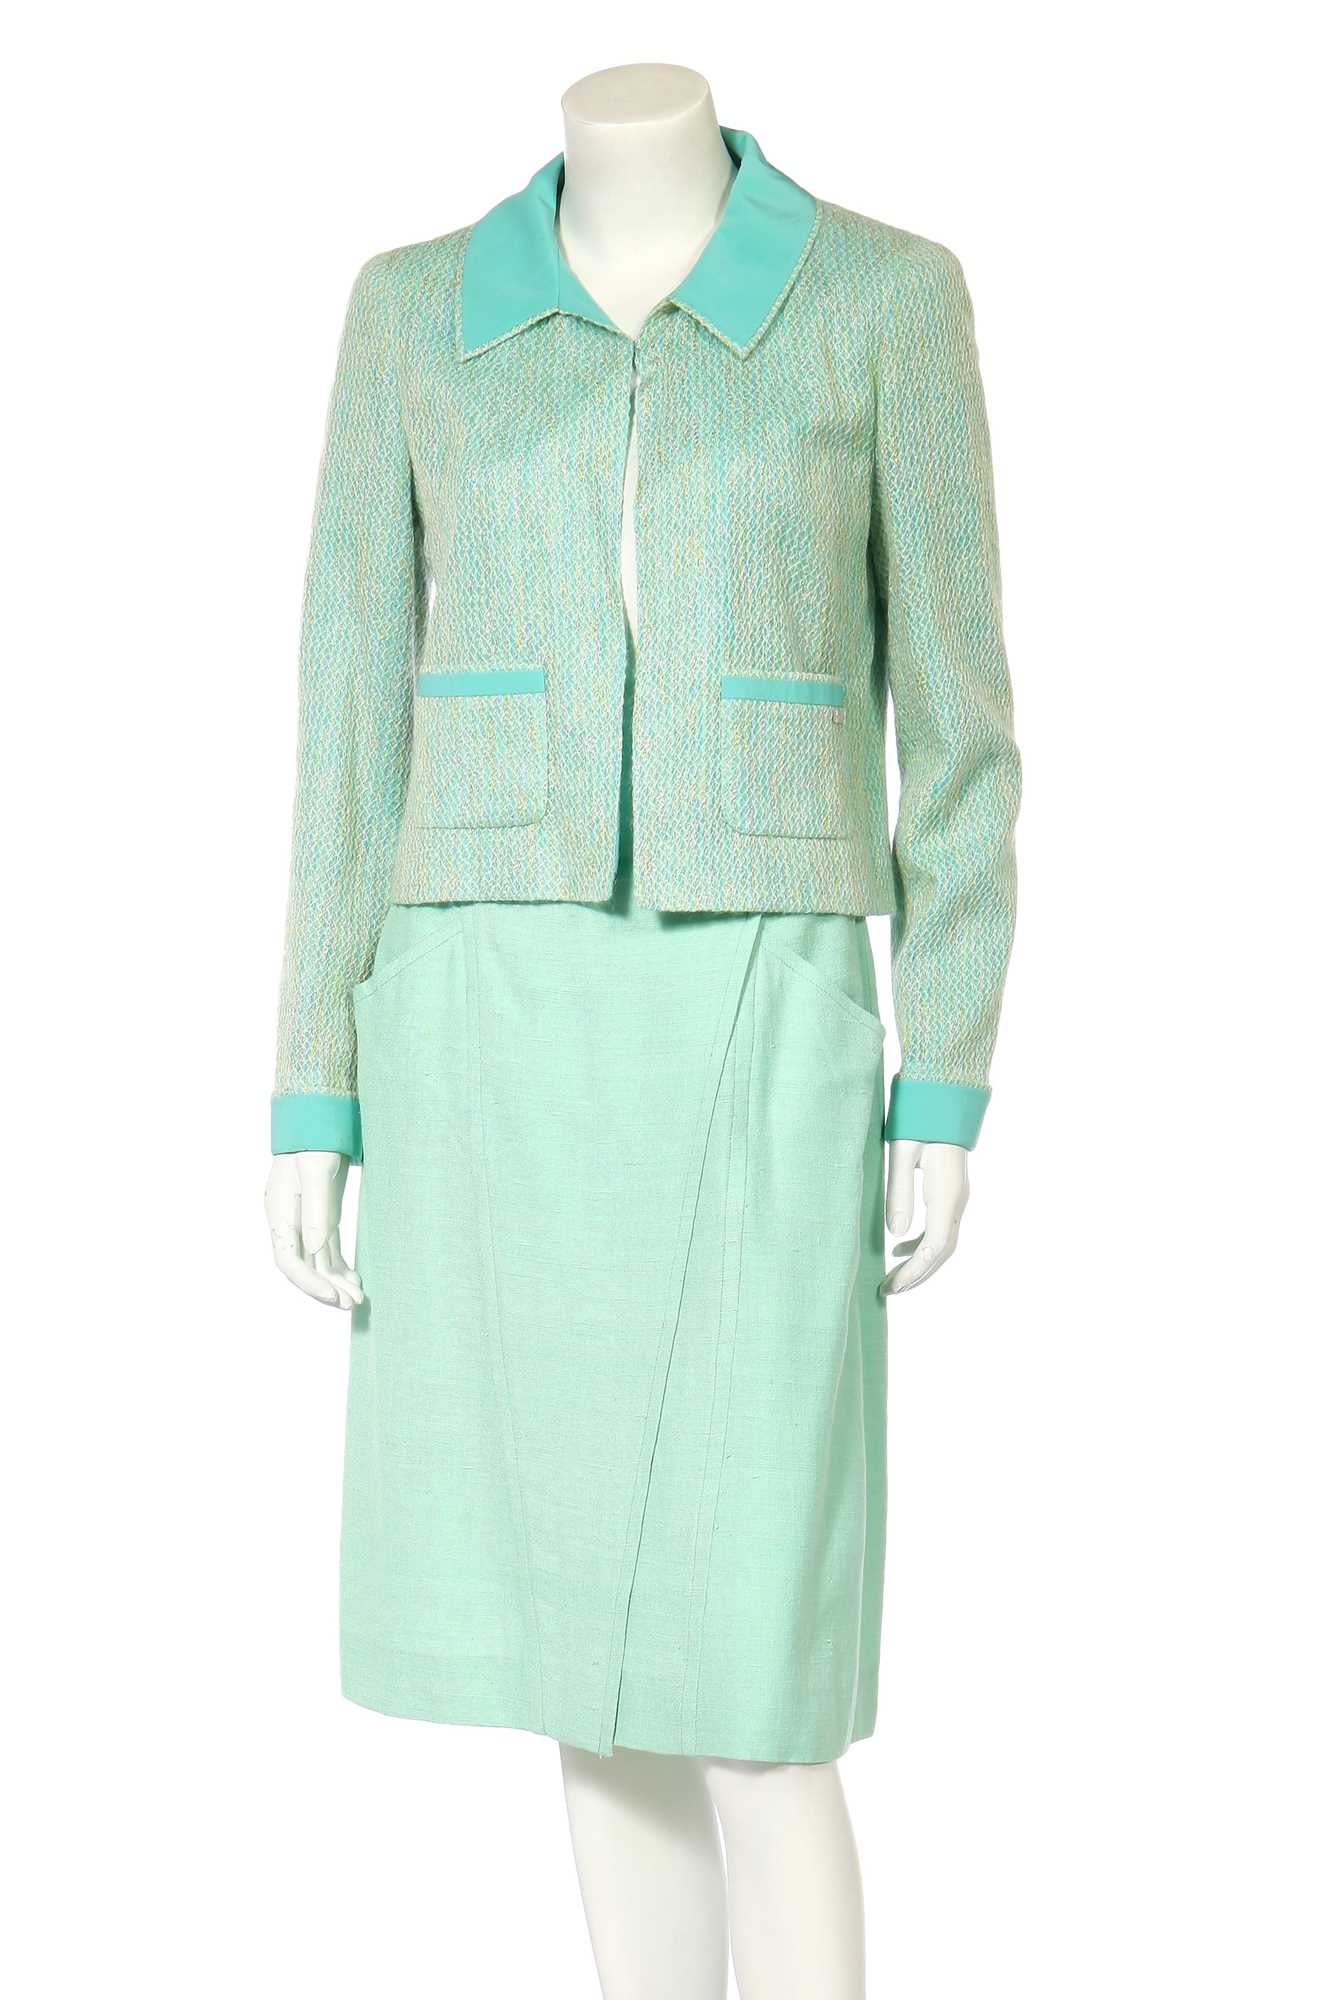 Lot 33 - A Chanel silk and mohair jacket woven in pastel shades, Cruise collection 2001